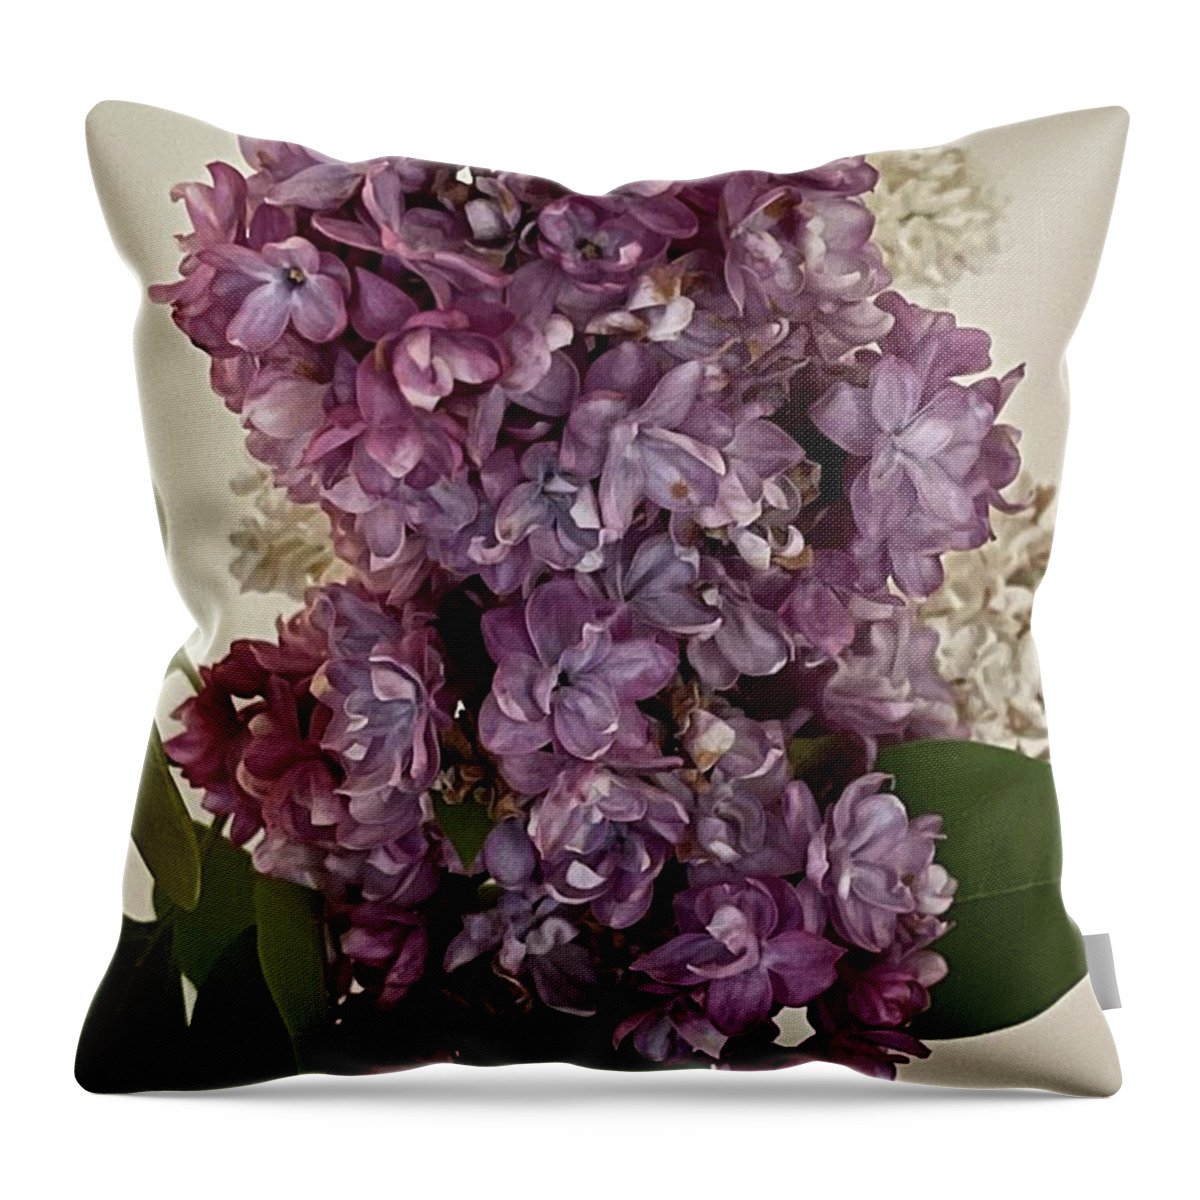 Lilacs Throw Pillow featuring the photograph Lilacs by Lisa White